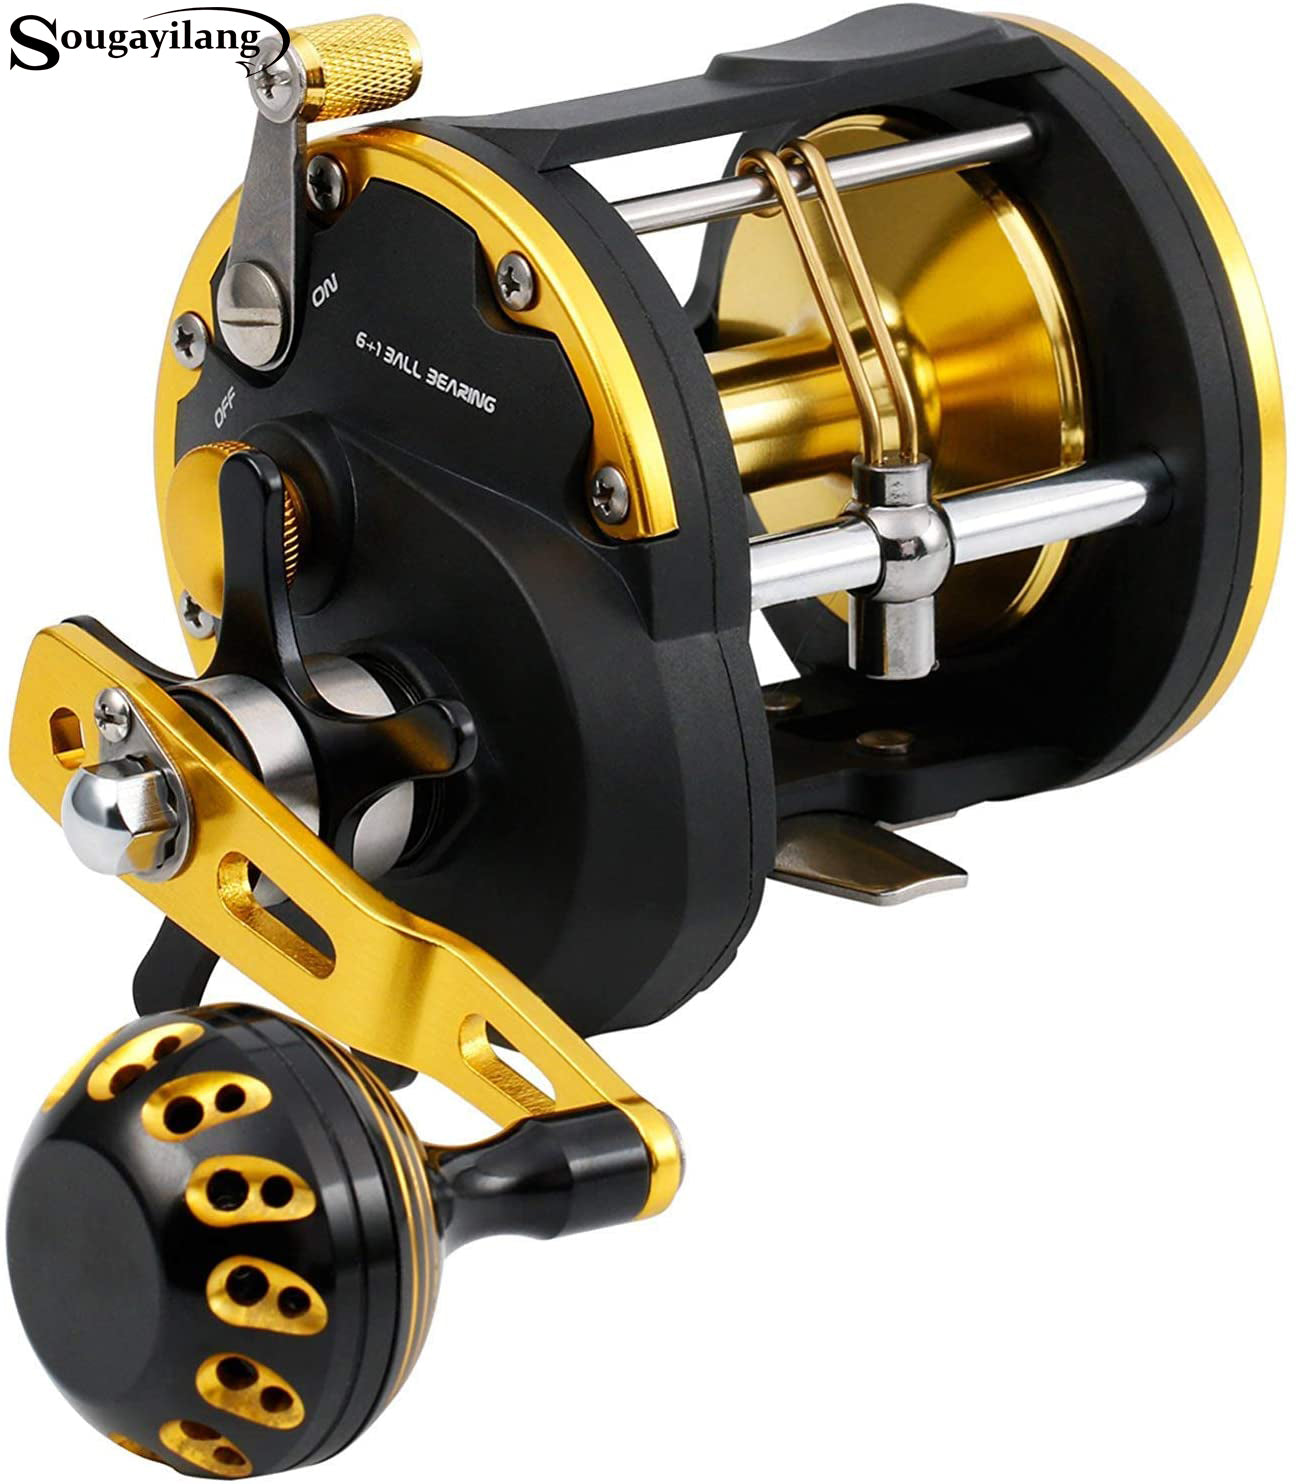 Sougayilang Trolling Reel Level Wind Conventional Reel Graphite Body  Fishing Reel, Durable Stainless-Steel-DTR30 Left Handle